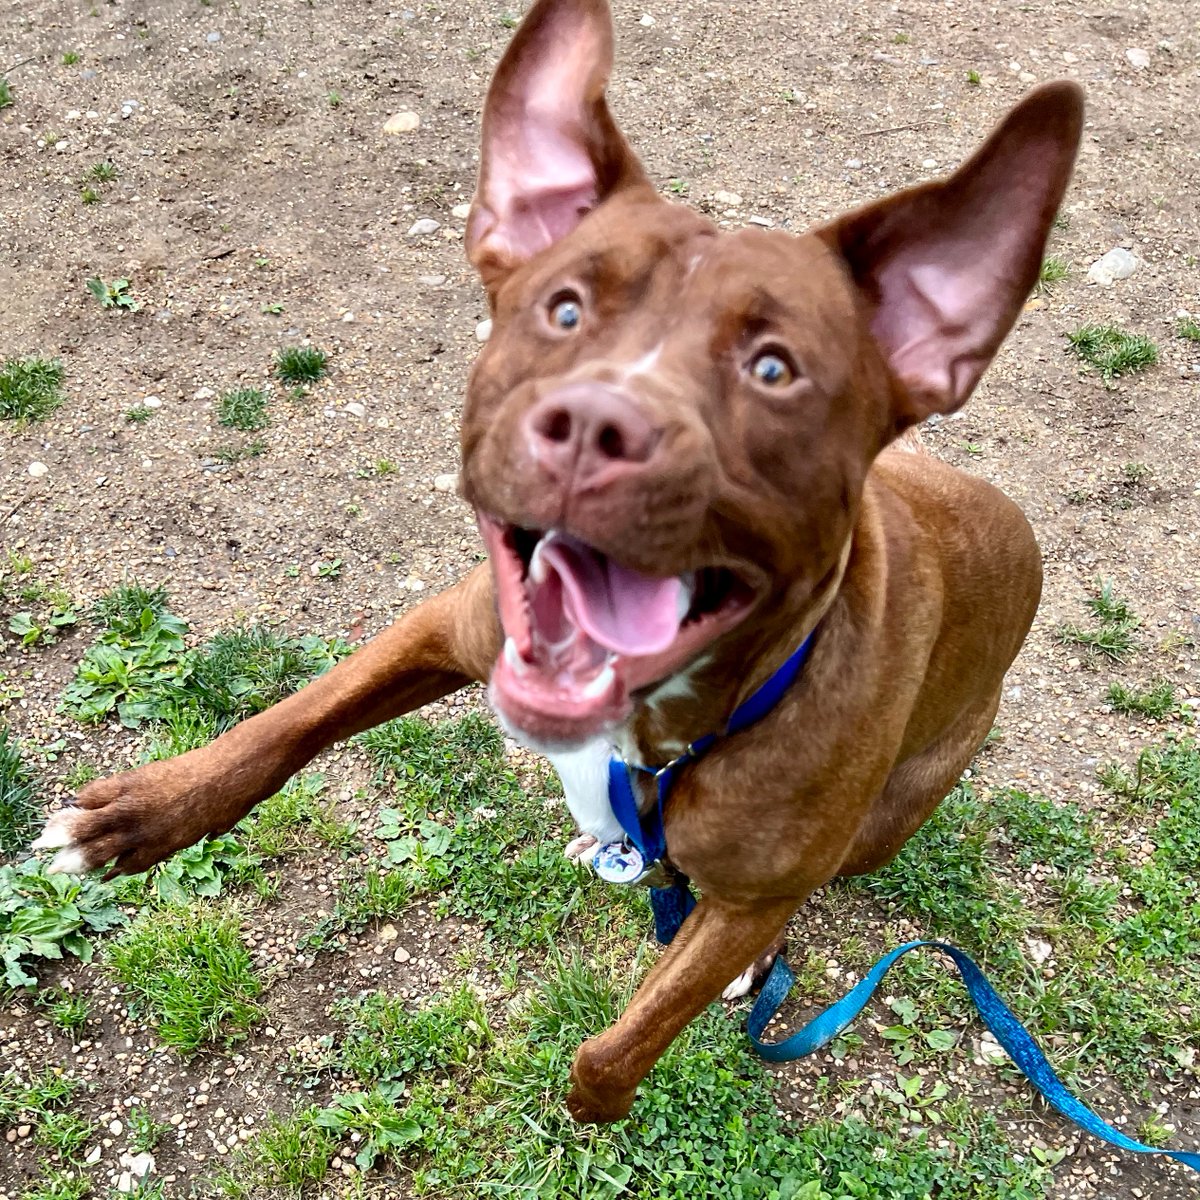 3 ... 2 ... 1 .... we have liftoff! 🚀Adoptable Brownie is out-of-this-world! 🌎 He's looking for a co-pilot who's up for adventure and fun. Whether its playing fetch or taking a dip in the pool, Brownie is always up for a good time. #alexanimals #alexandriava #adopt